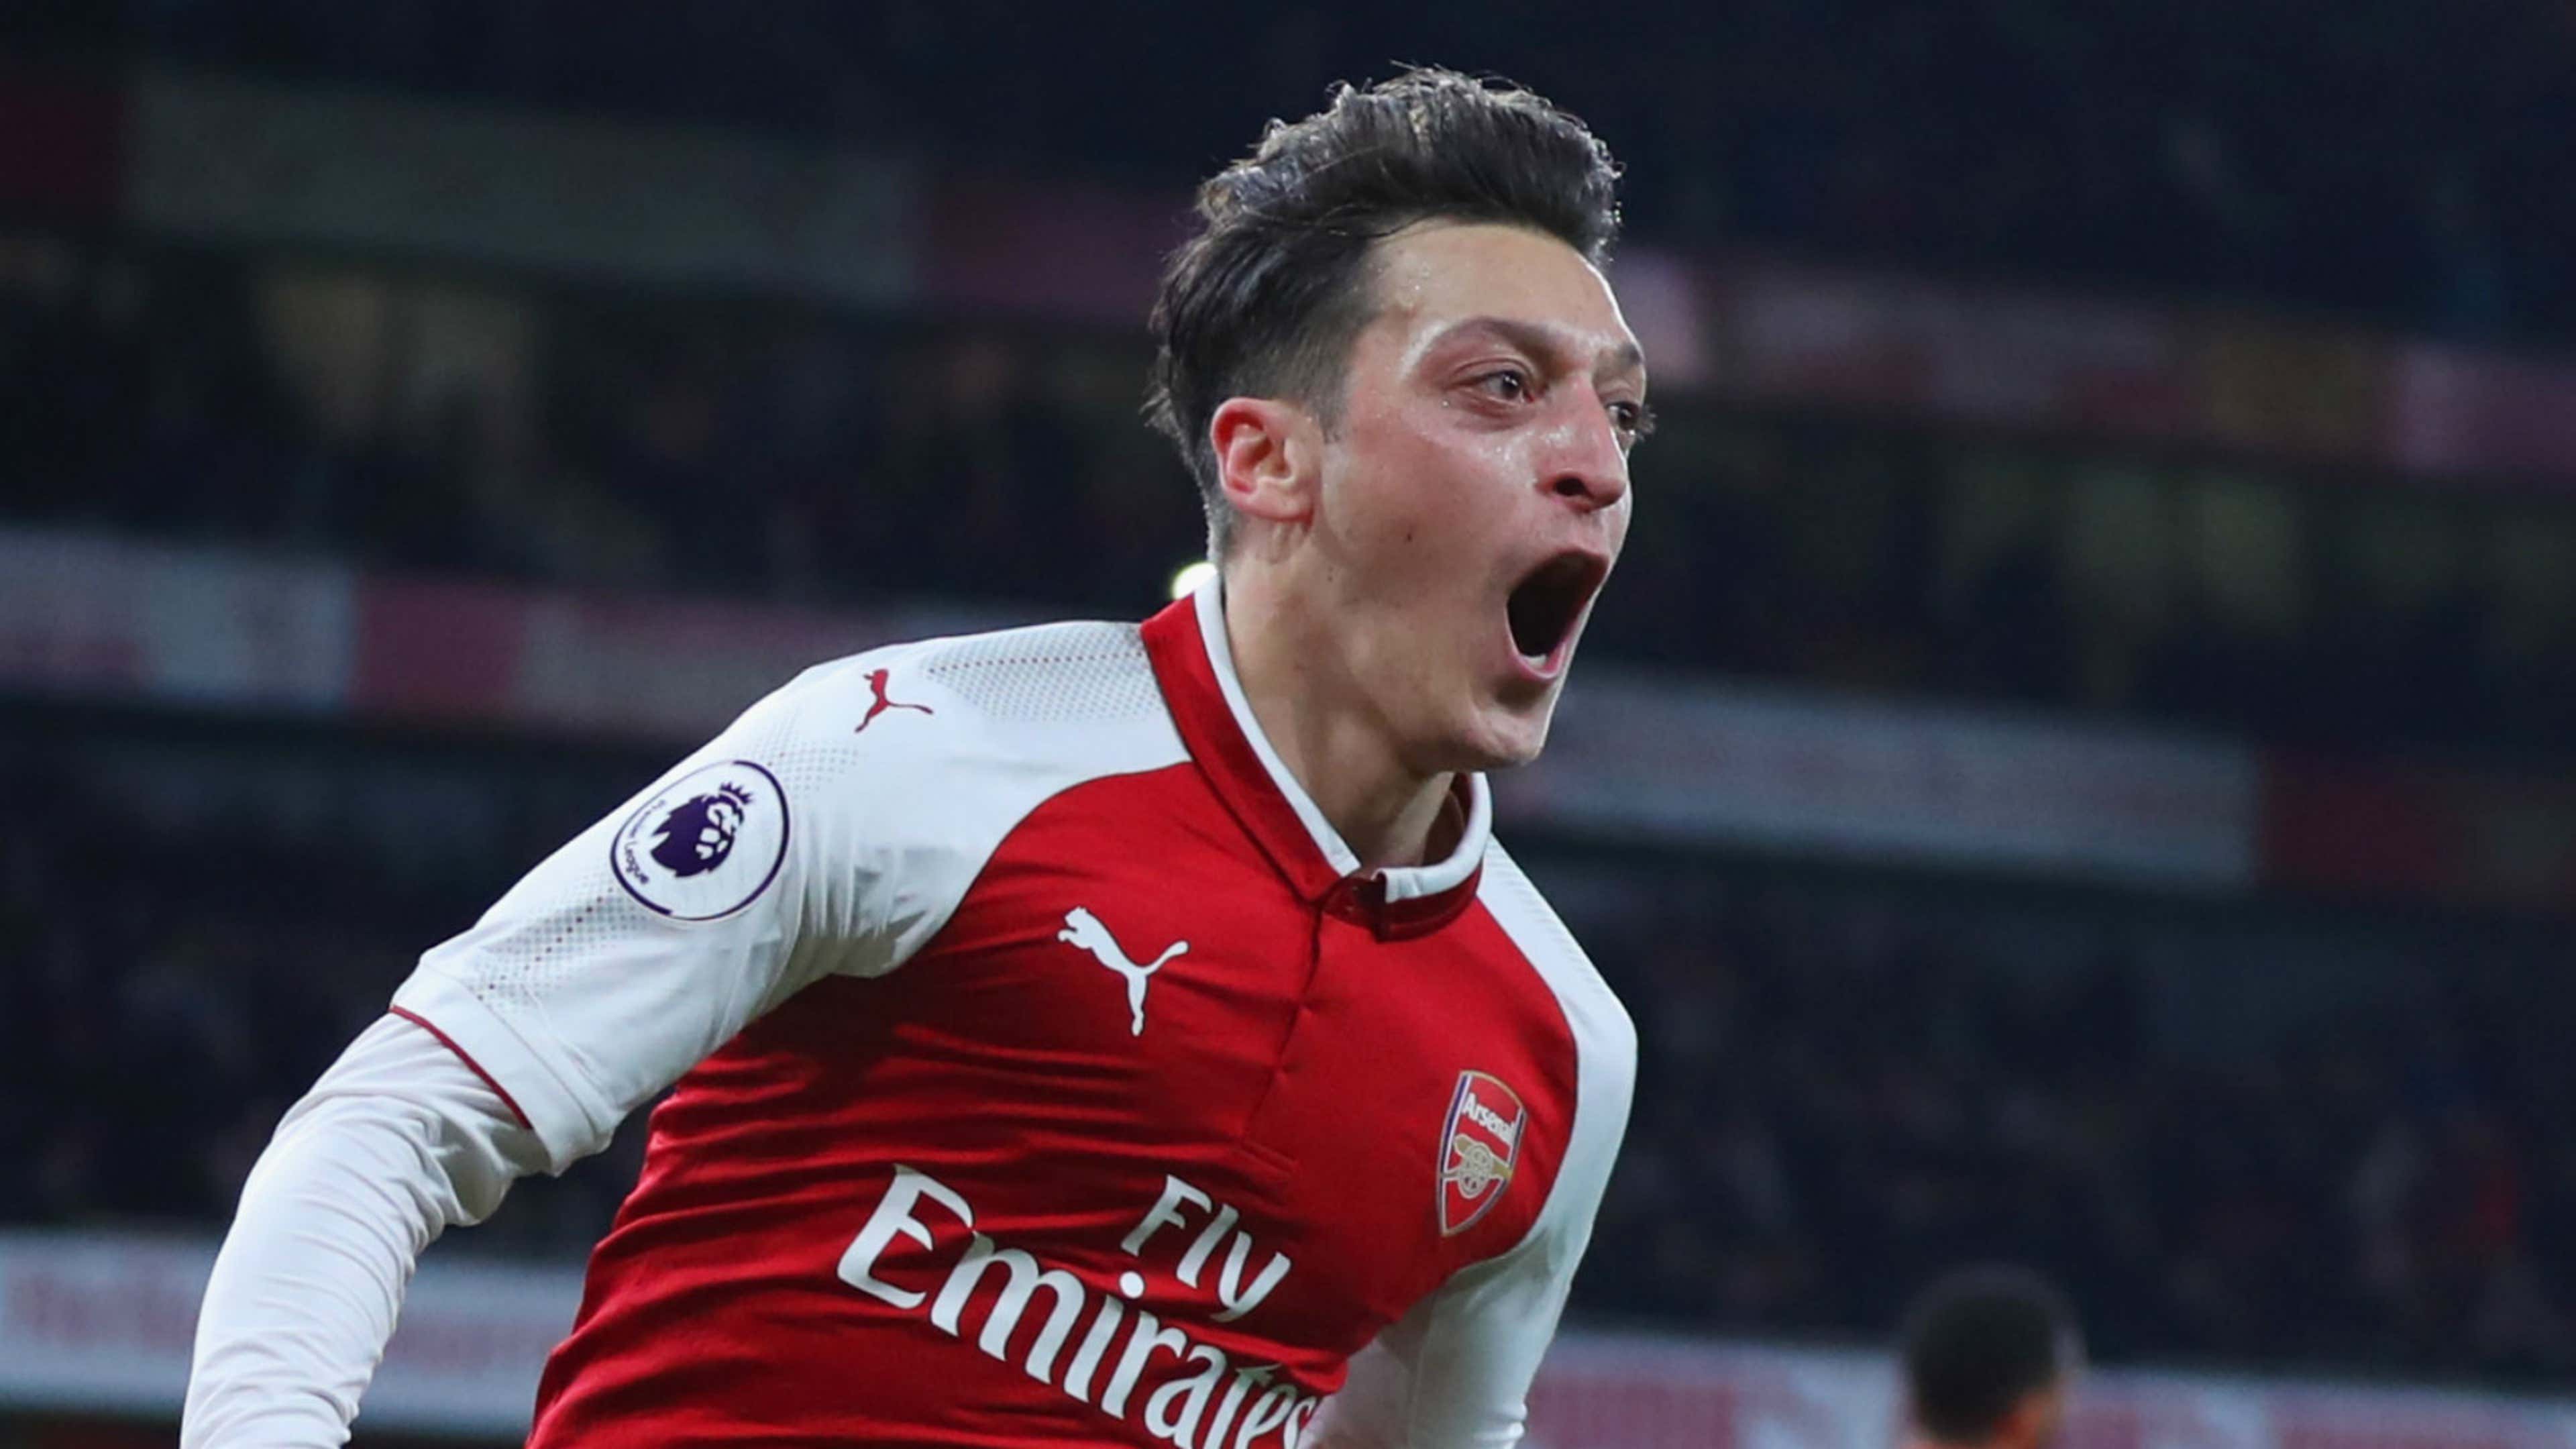 FUT Sheriff - 💥Ozil🇩🇪 is coming now as EOAE✅️